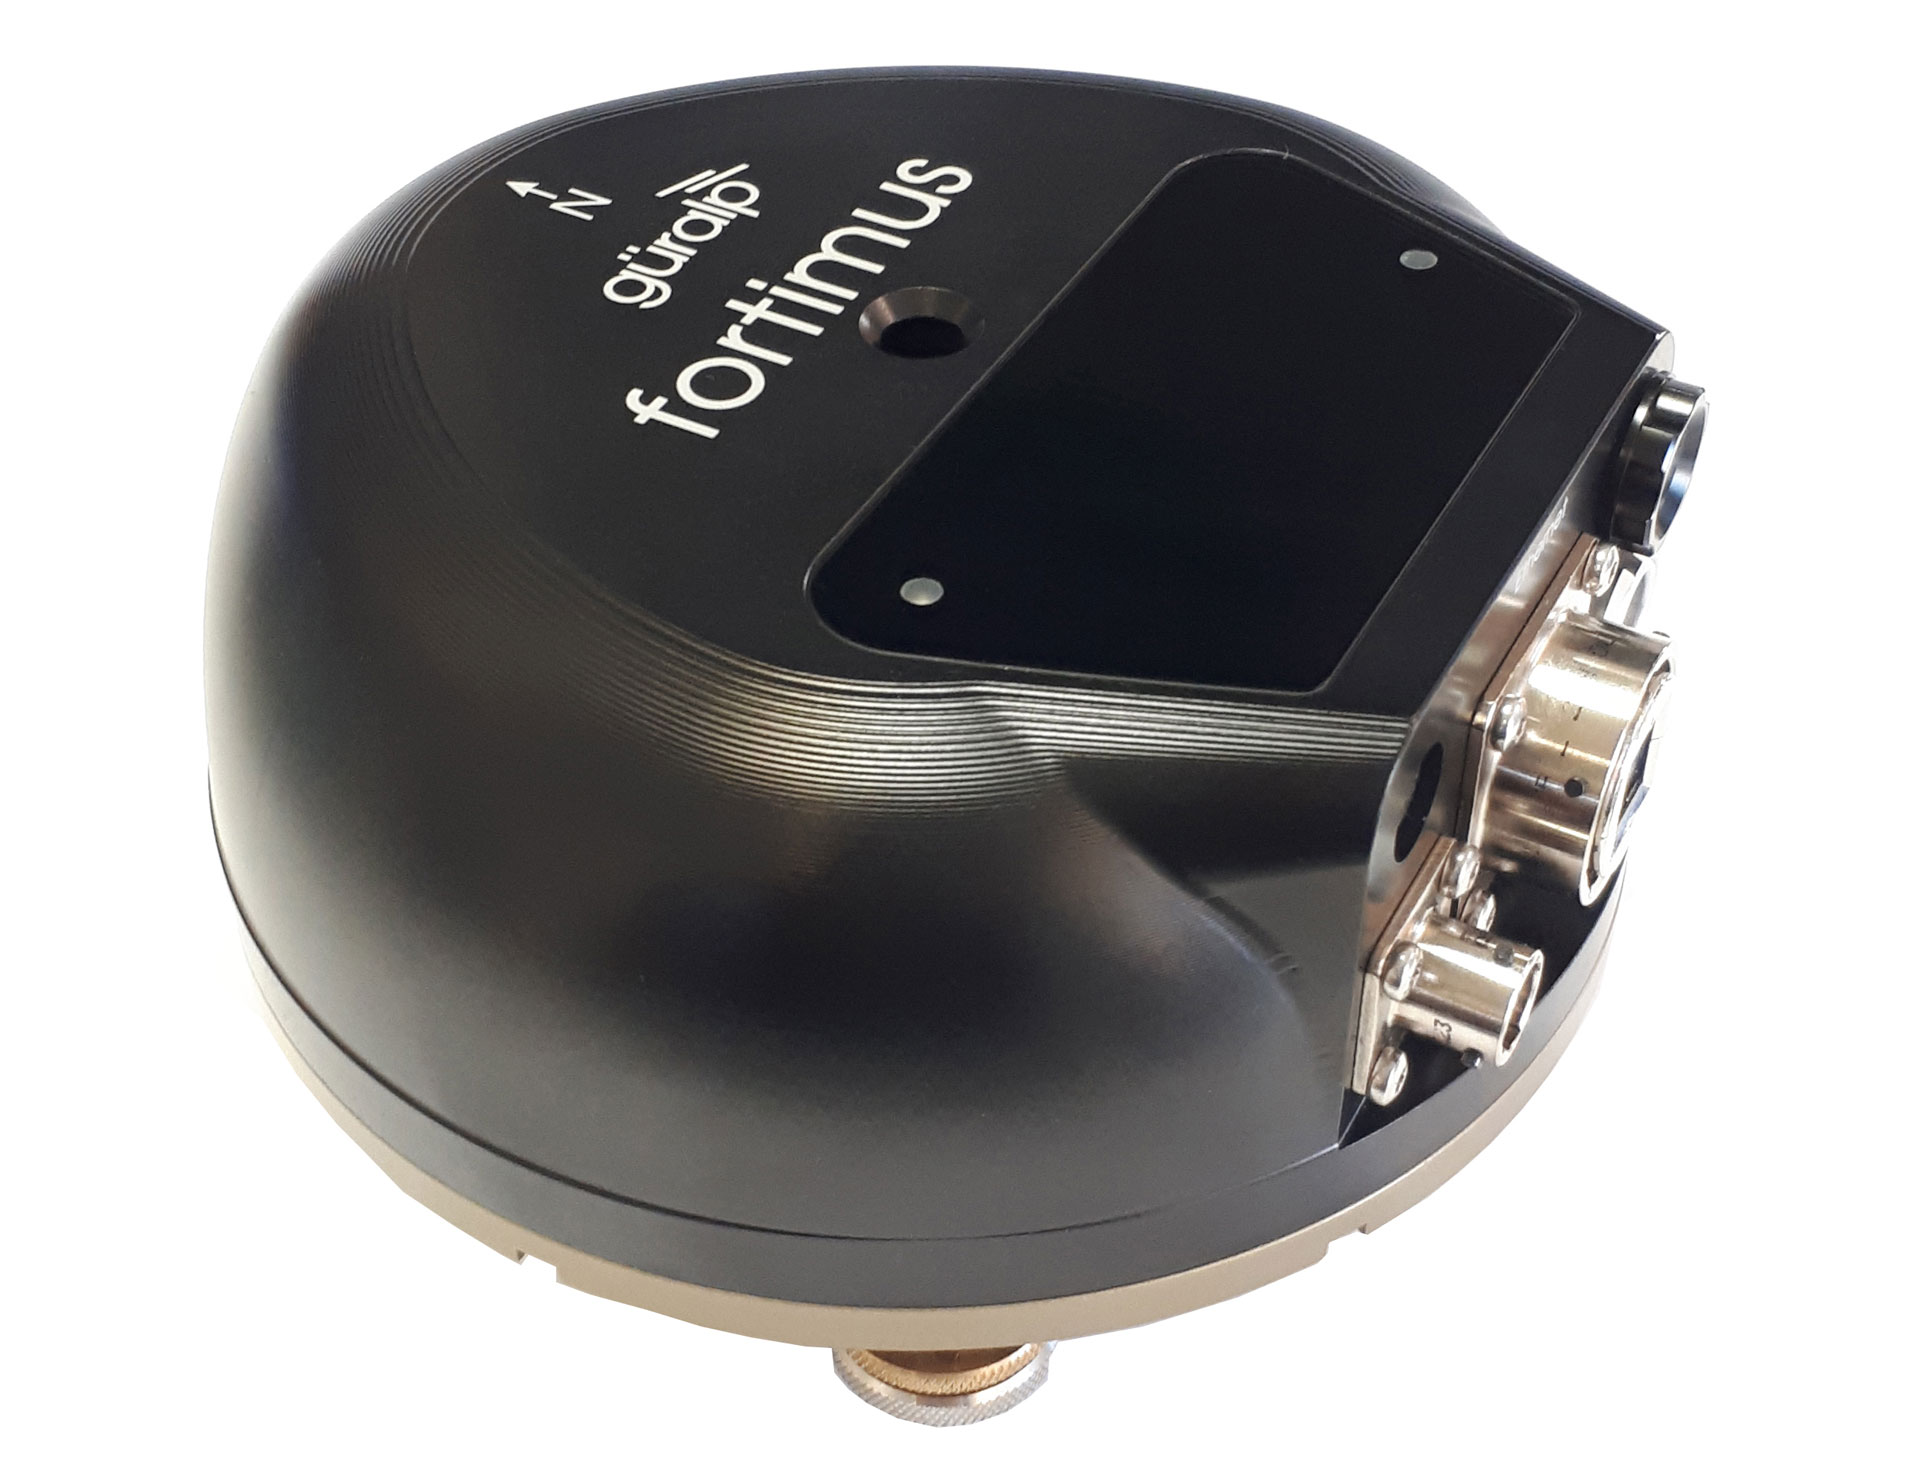 Güralp to supply 190 digital accelerometers to Canadian Government for Earthquake Early Warning